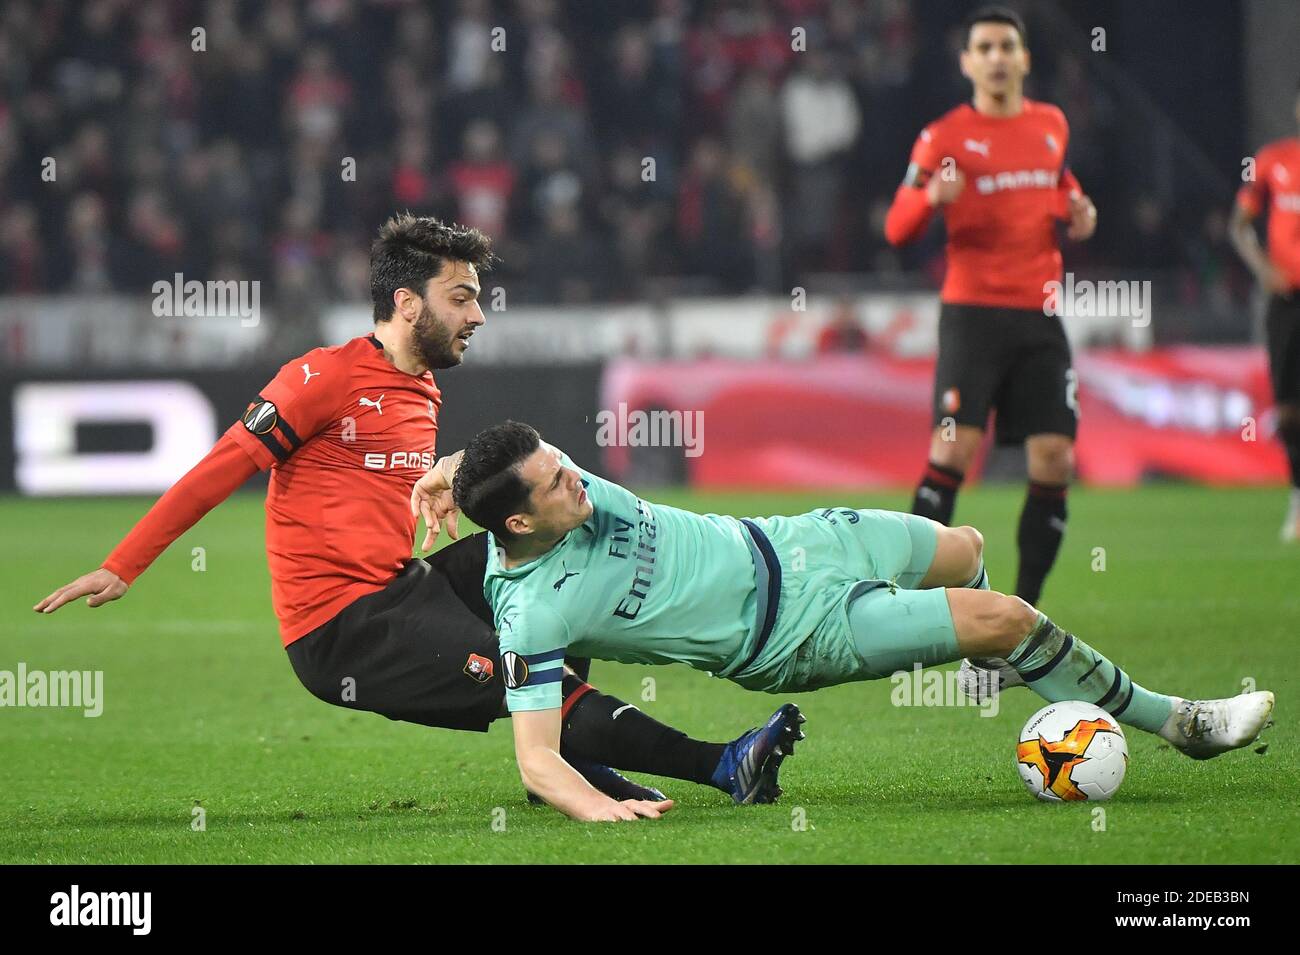 Rennes' Clement Grenier during the UEFA Europa League round of 32 second leg football match between Rennes and Arsenal FC at the at the Roazhon Park stadium in Rennes, France on March 7, 2019. photos by Christian Liewig/ABACAPRESS.COM Stock Photo